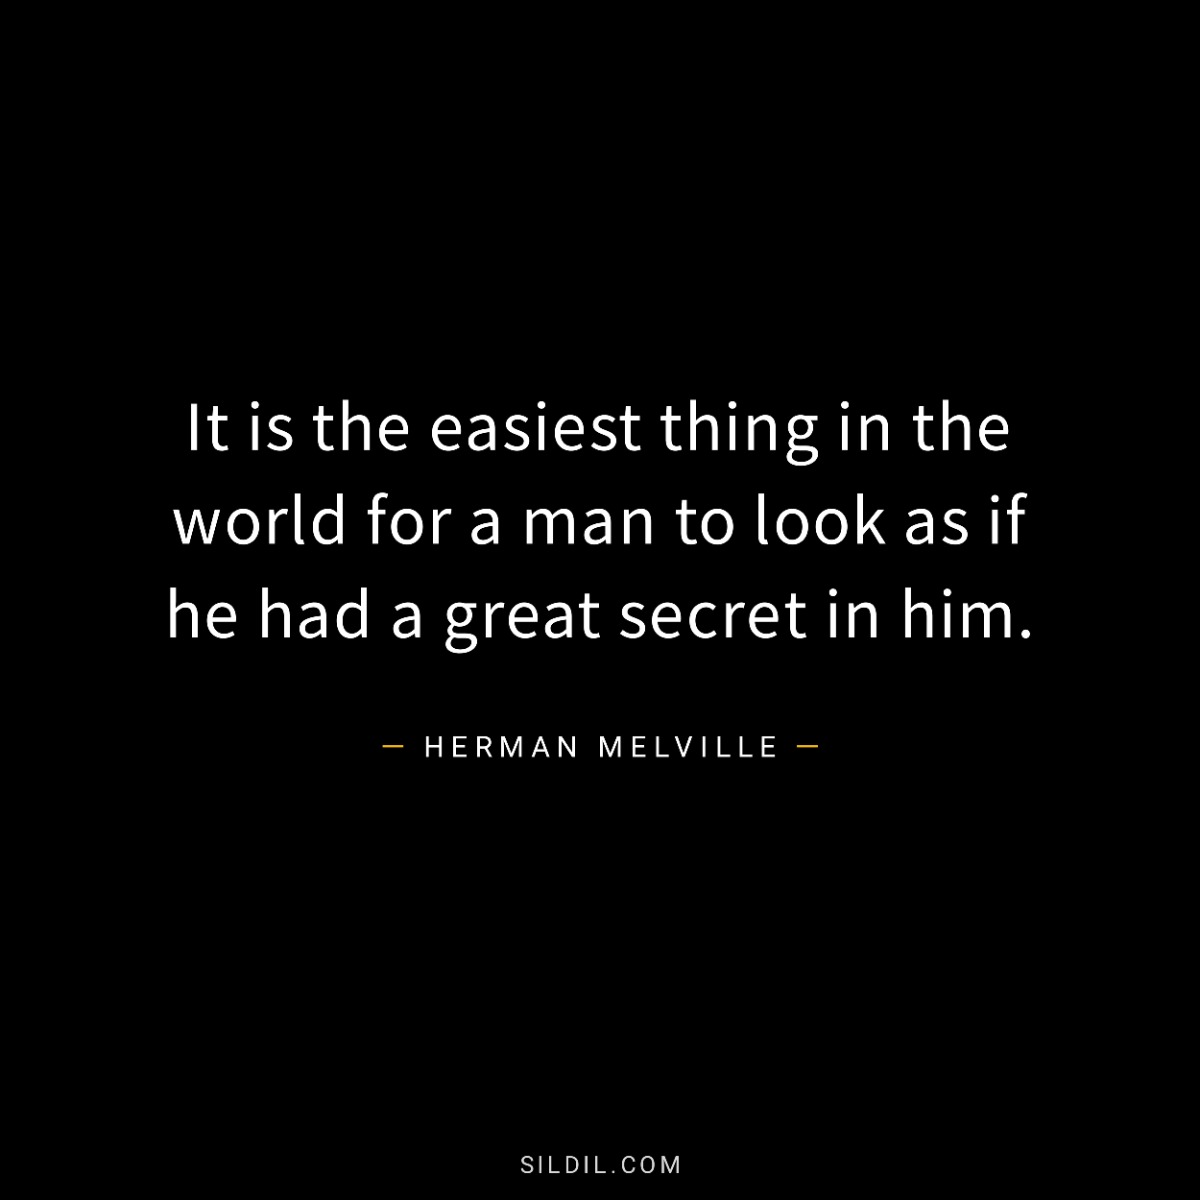 It is the easiest thing in the world for a man to look as if he had a great secret in him.